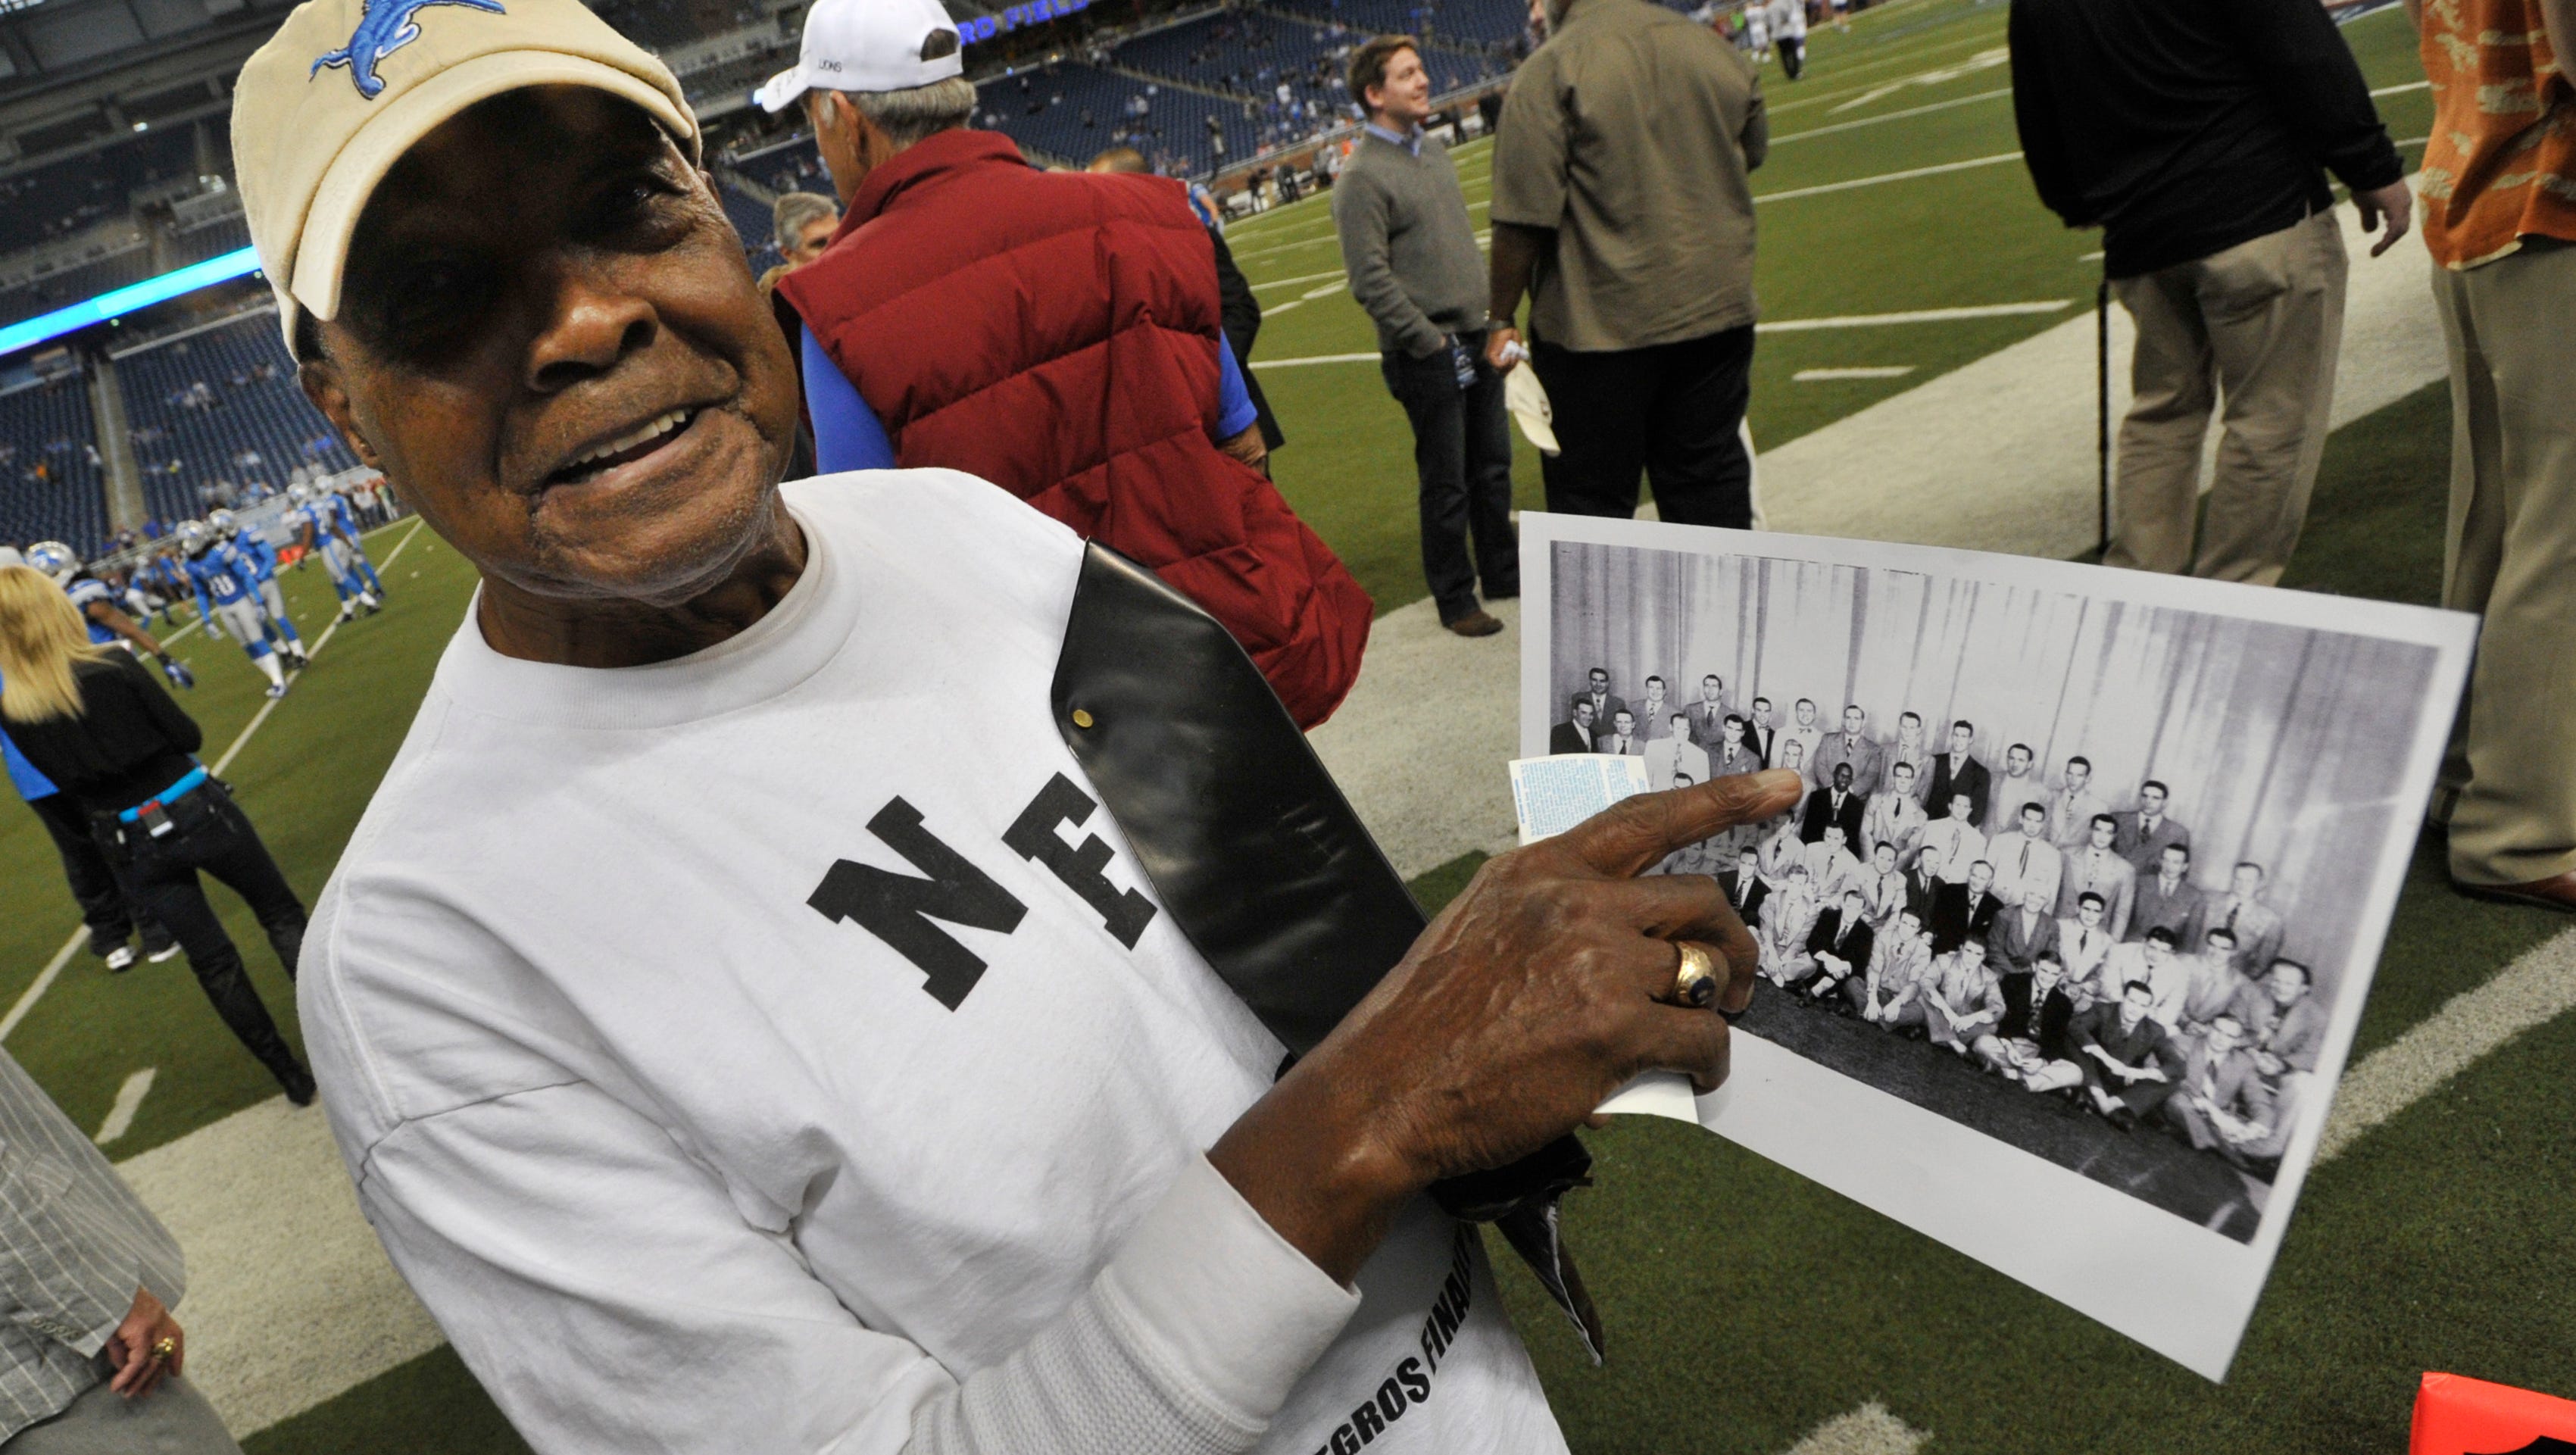 Wally Triplett shows off the 1950 Detroit Lions organization team picture on the sidelines of the game before Detroit takes on the Minnesota Vikings at Ford Field in Detroit, on September 30, 2012.  When  which player he was, he smiled and said, "This was 1950 son, I was the black player."